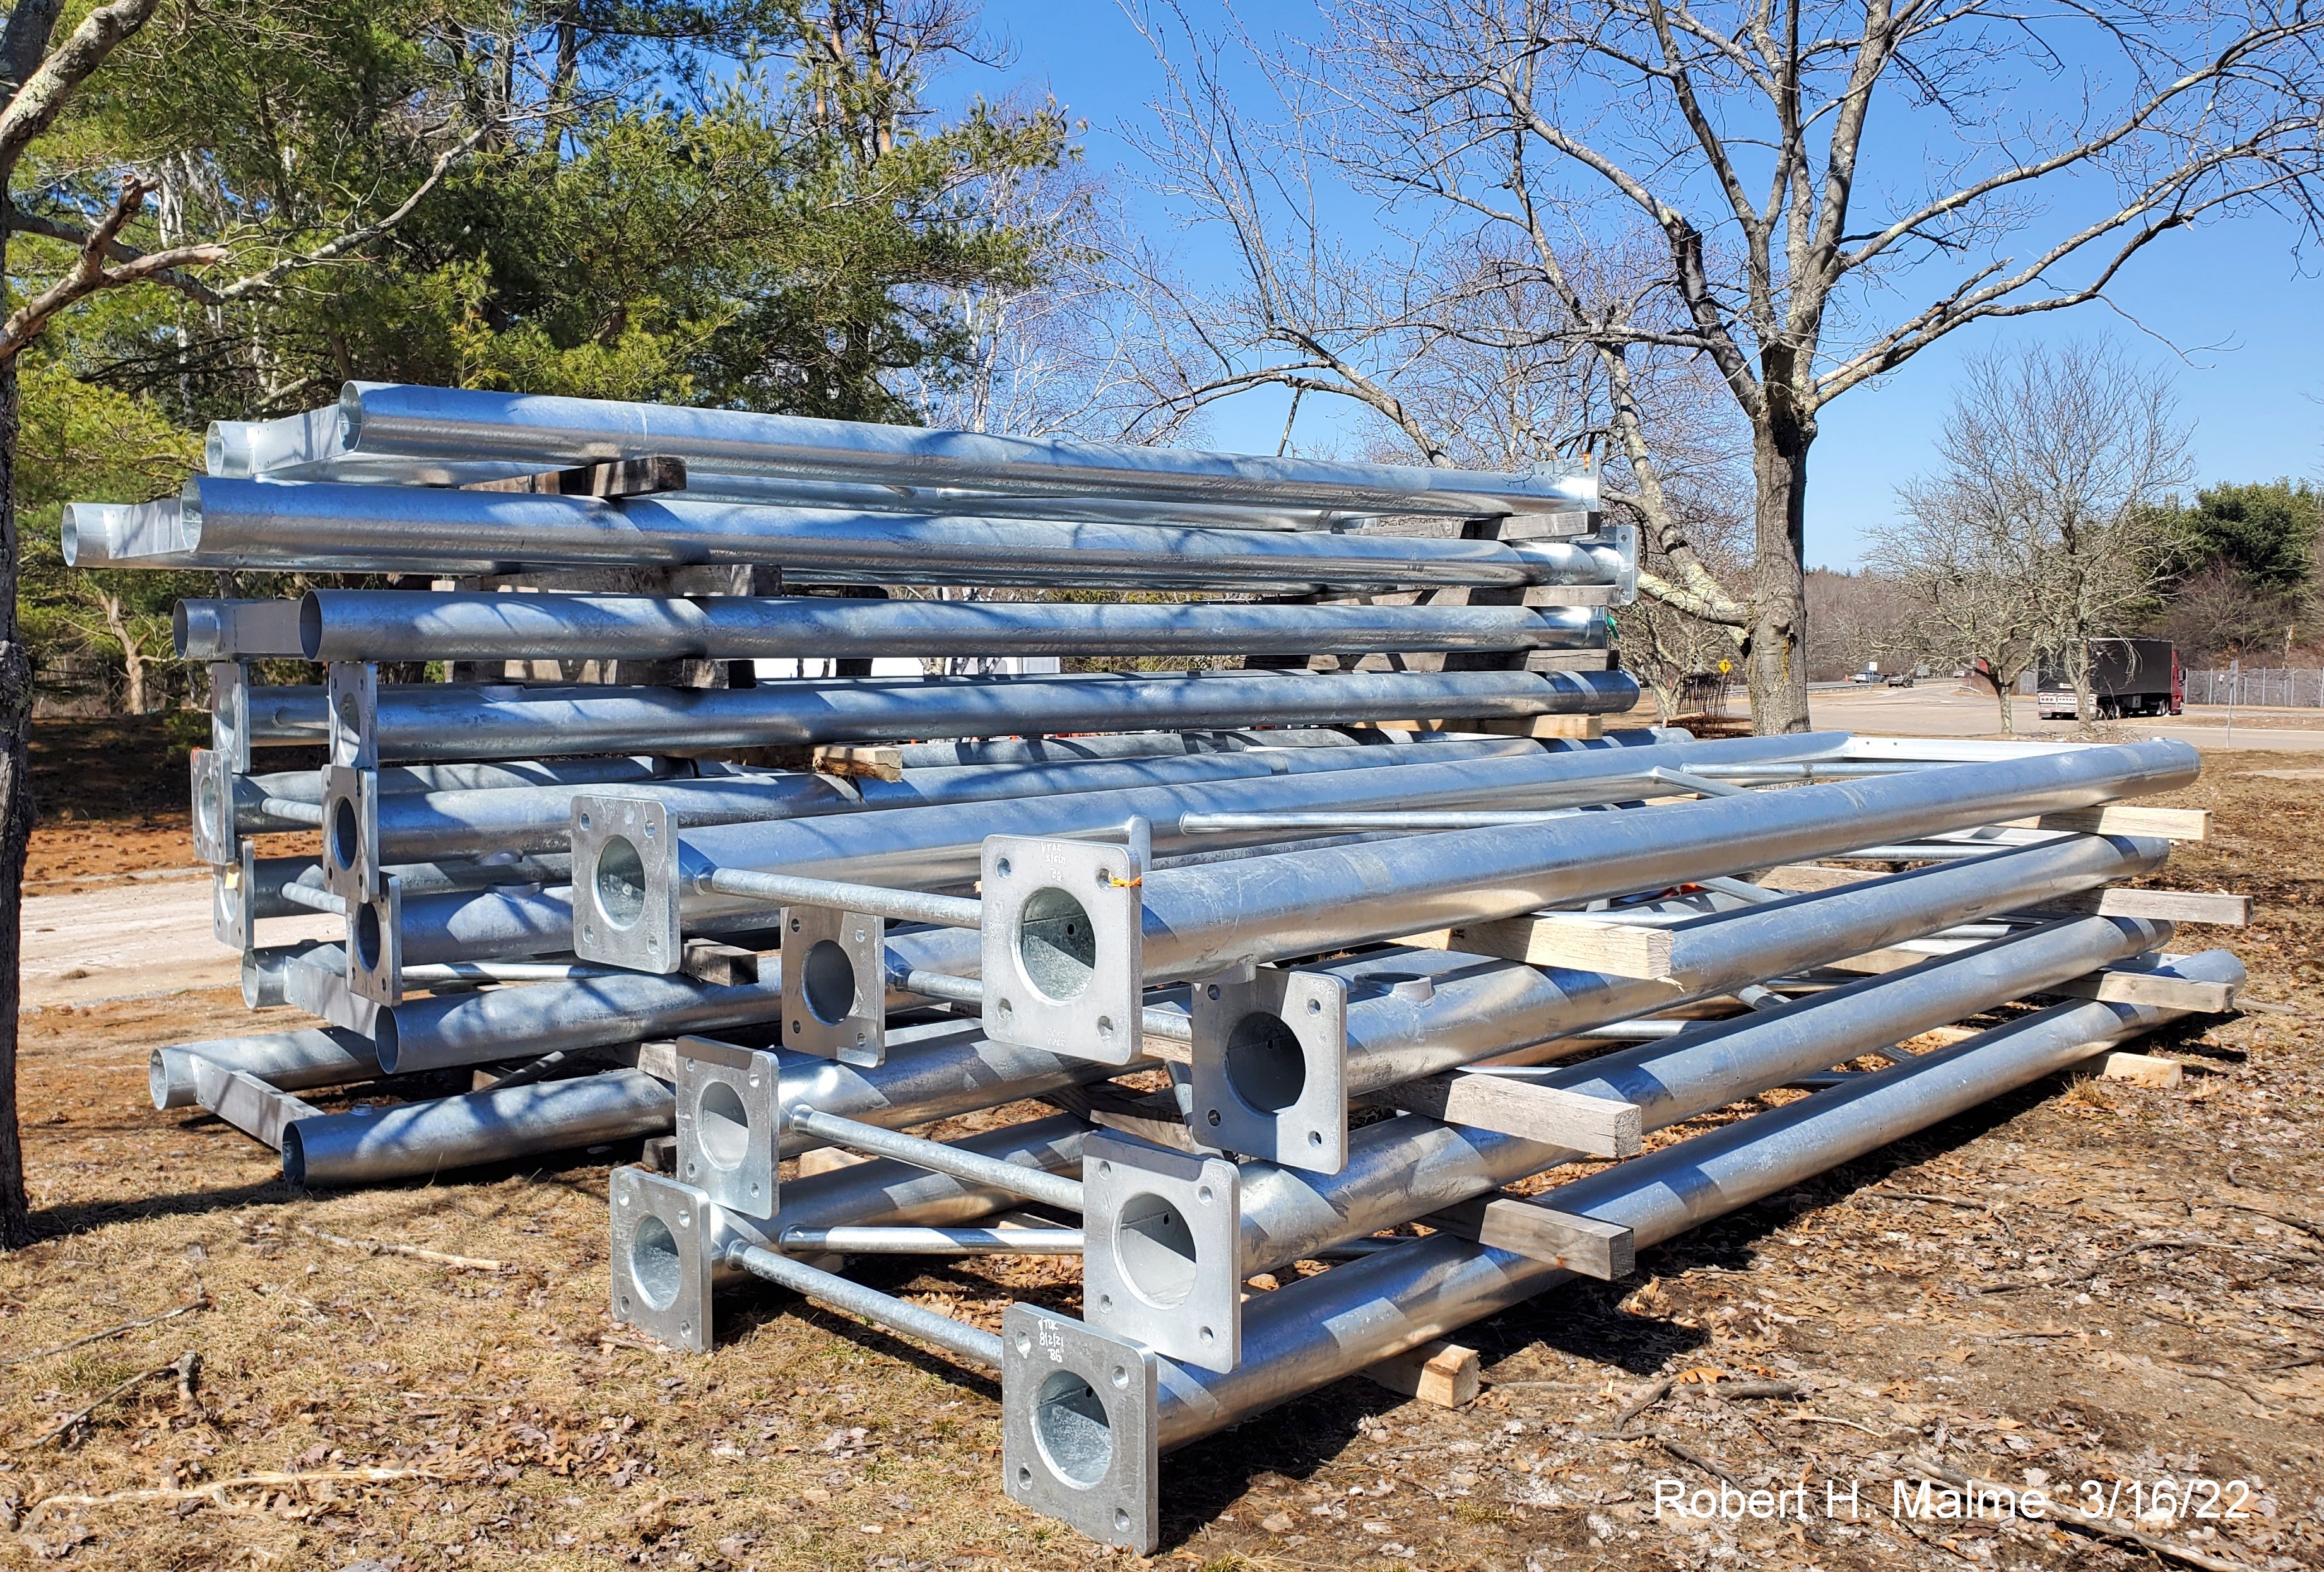 Image of sign gantries for I-95 Sign Replacement project being stored at Mansfield Rest Area, March 2022